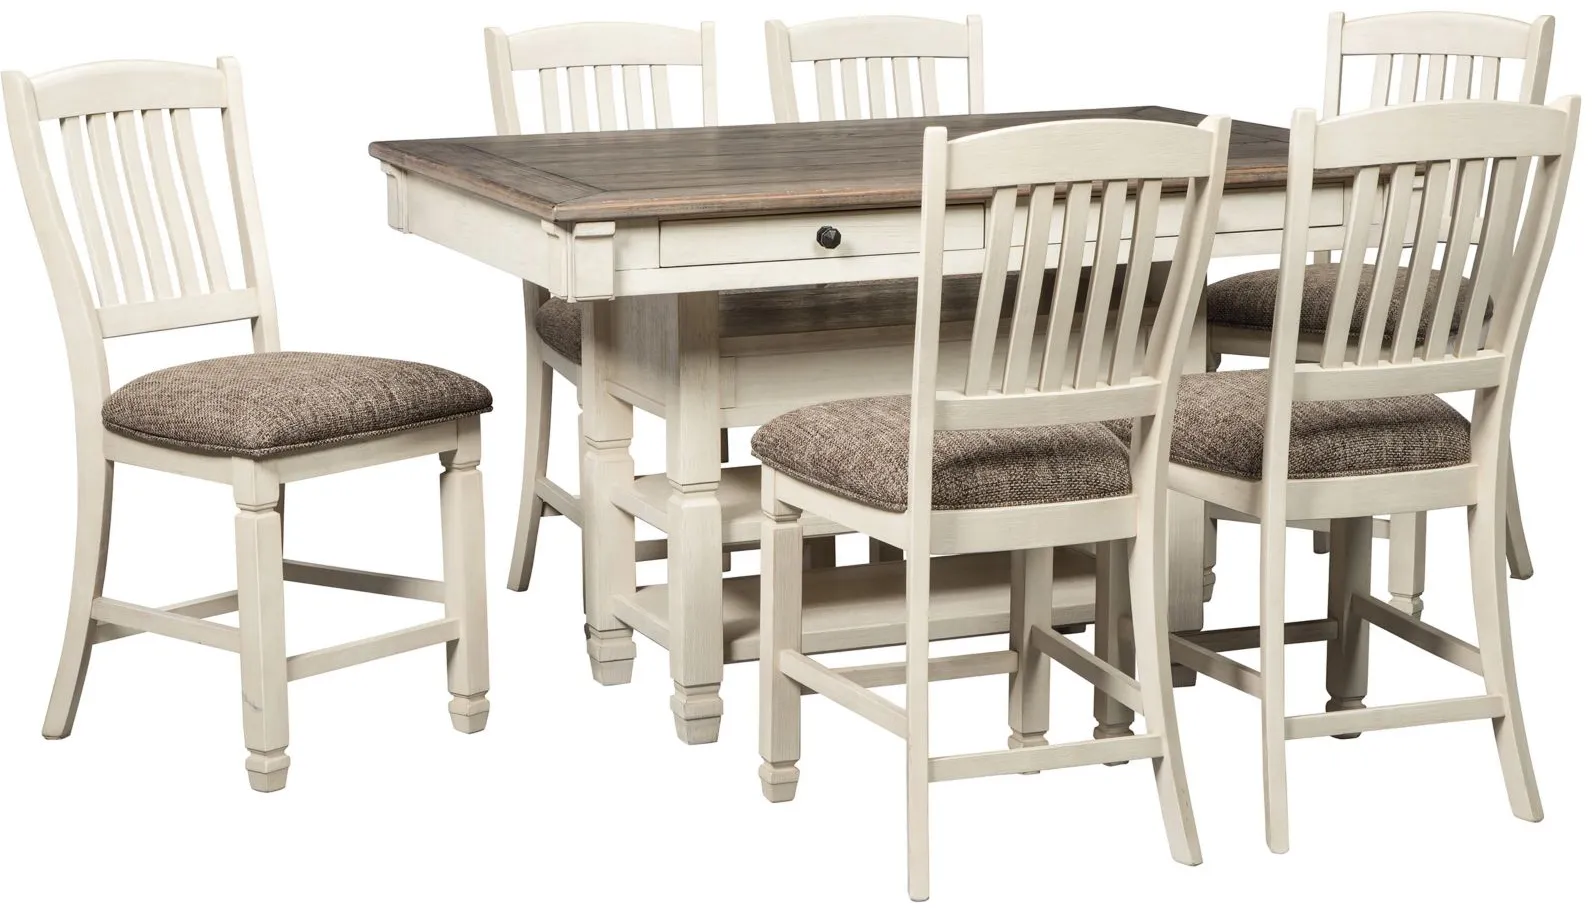 Aspen 7-pc. Counter Height Dining Set in Light Brown / Antique White by Ashley Furniture